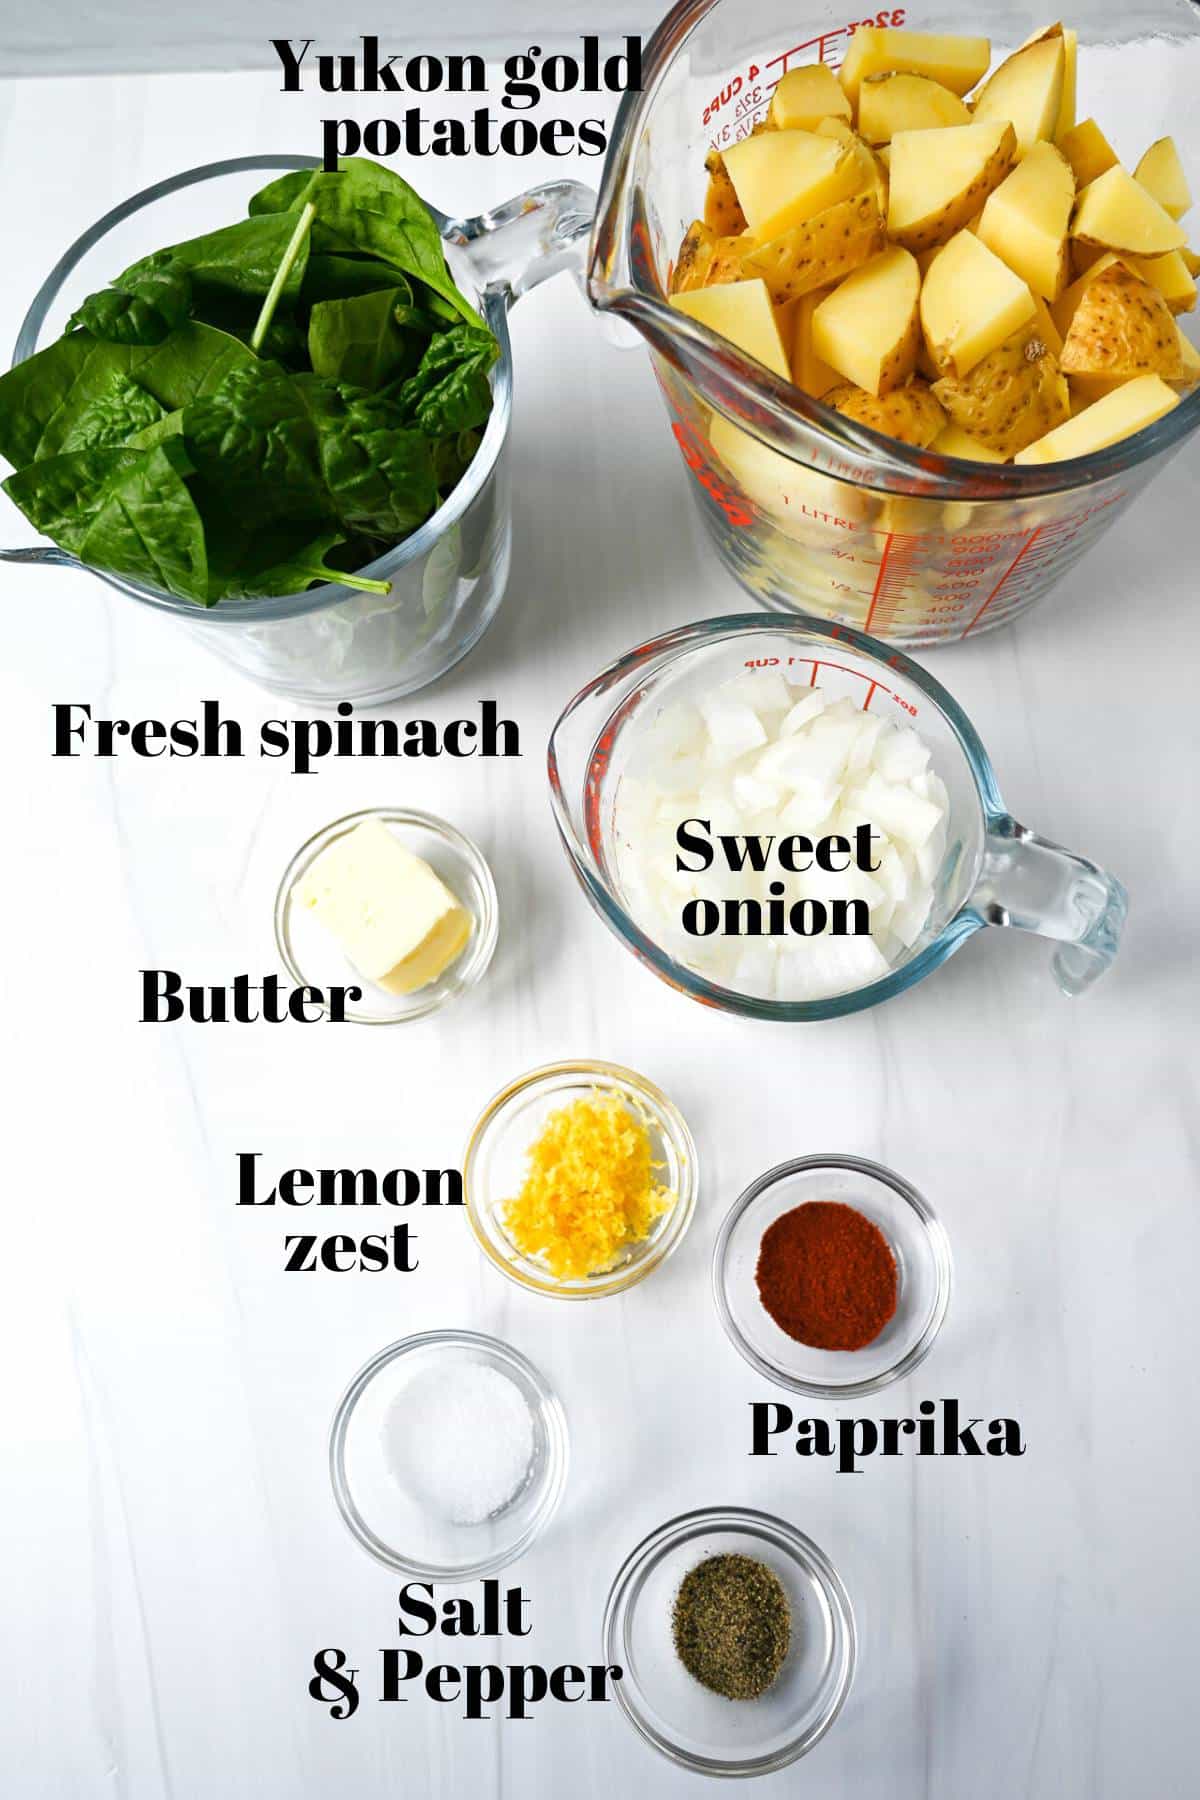 ingredients for sauteed potatoes and spinach measured out on a counter